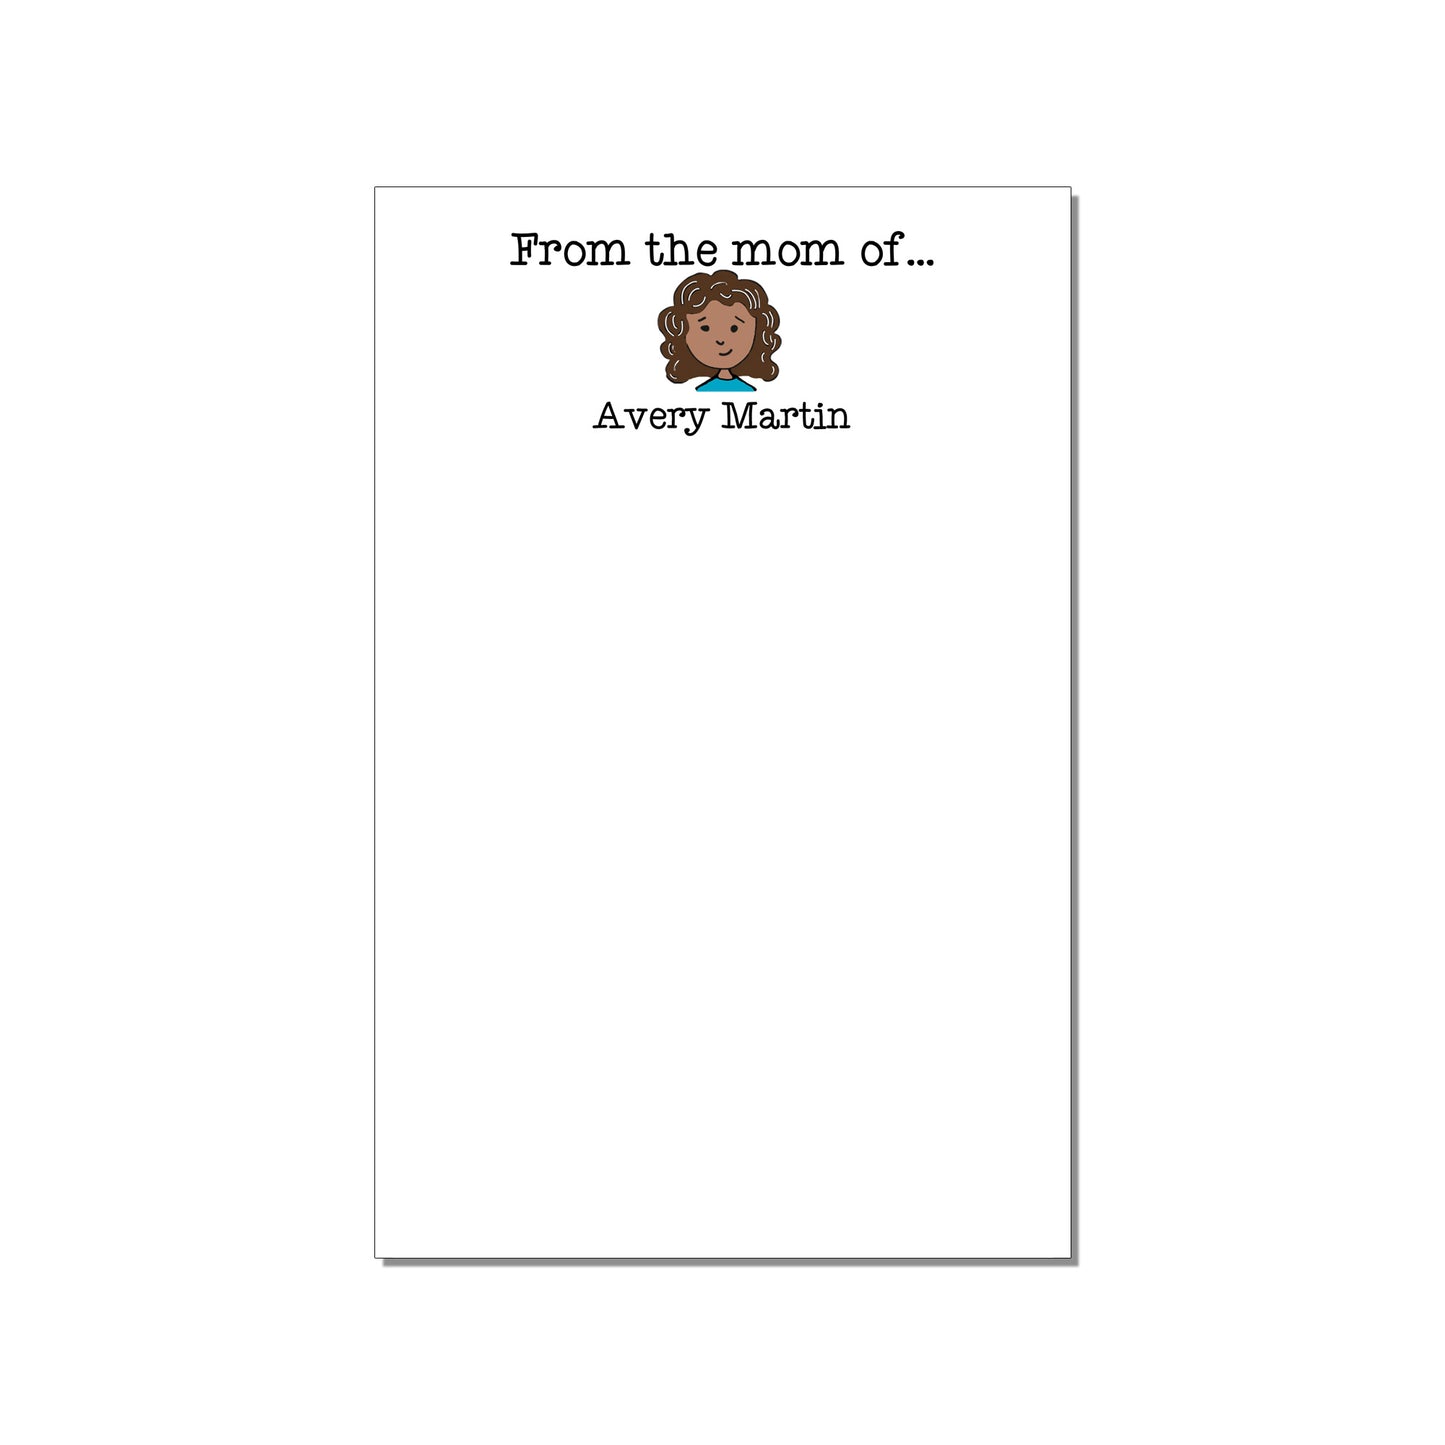 FROM THE MOM OF... ONE CHILD PERSONALIZED LARGE NOTEPAD